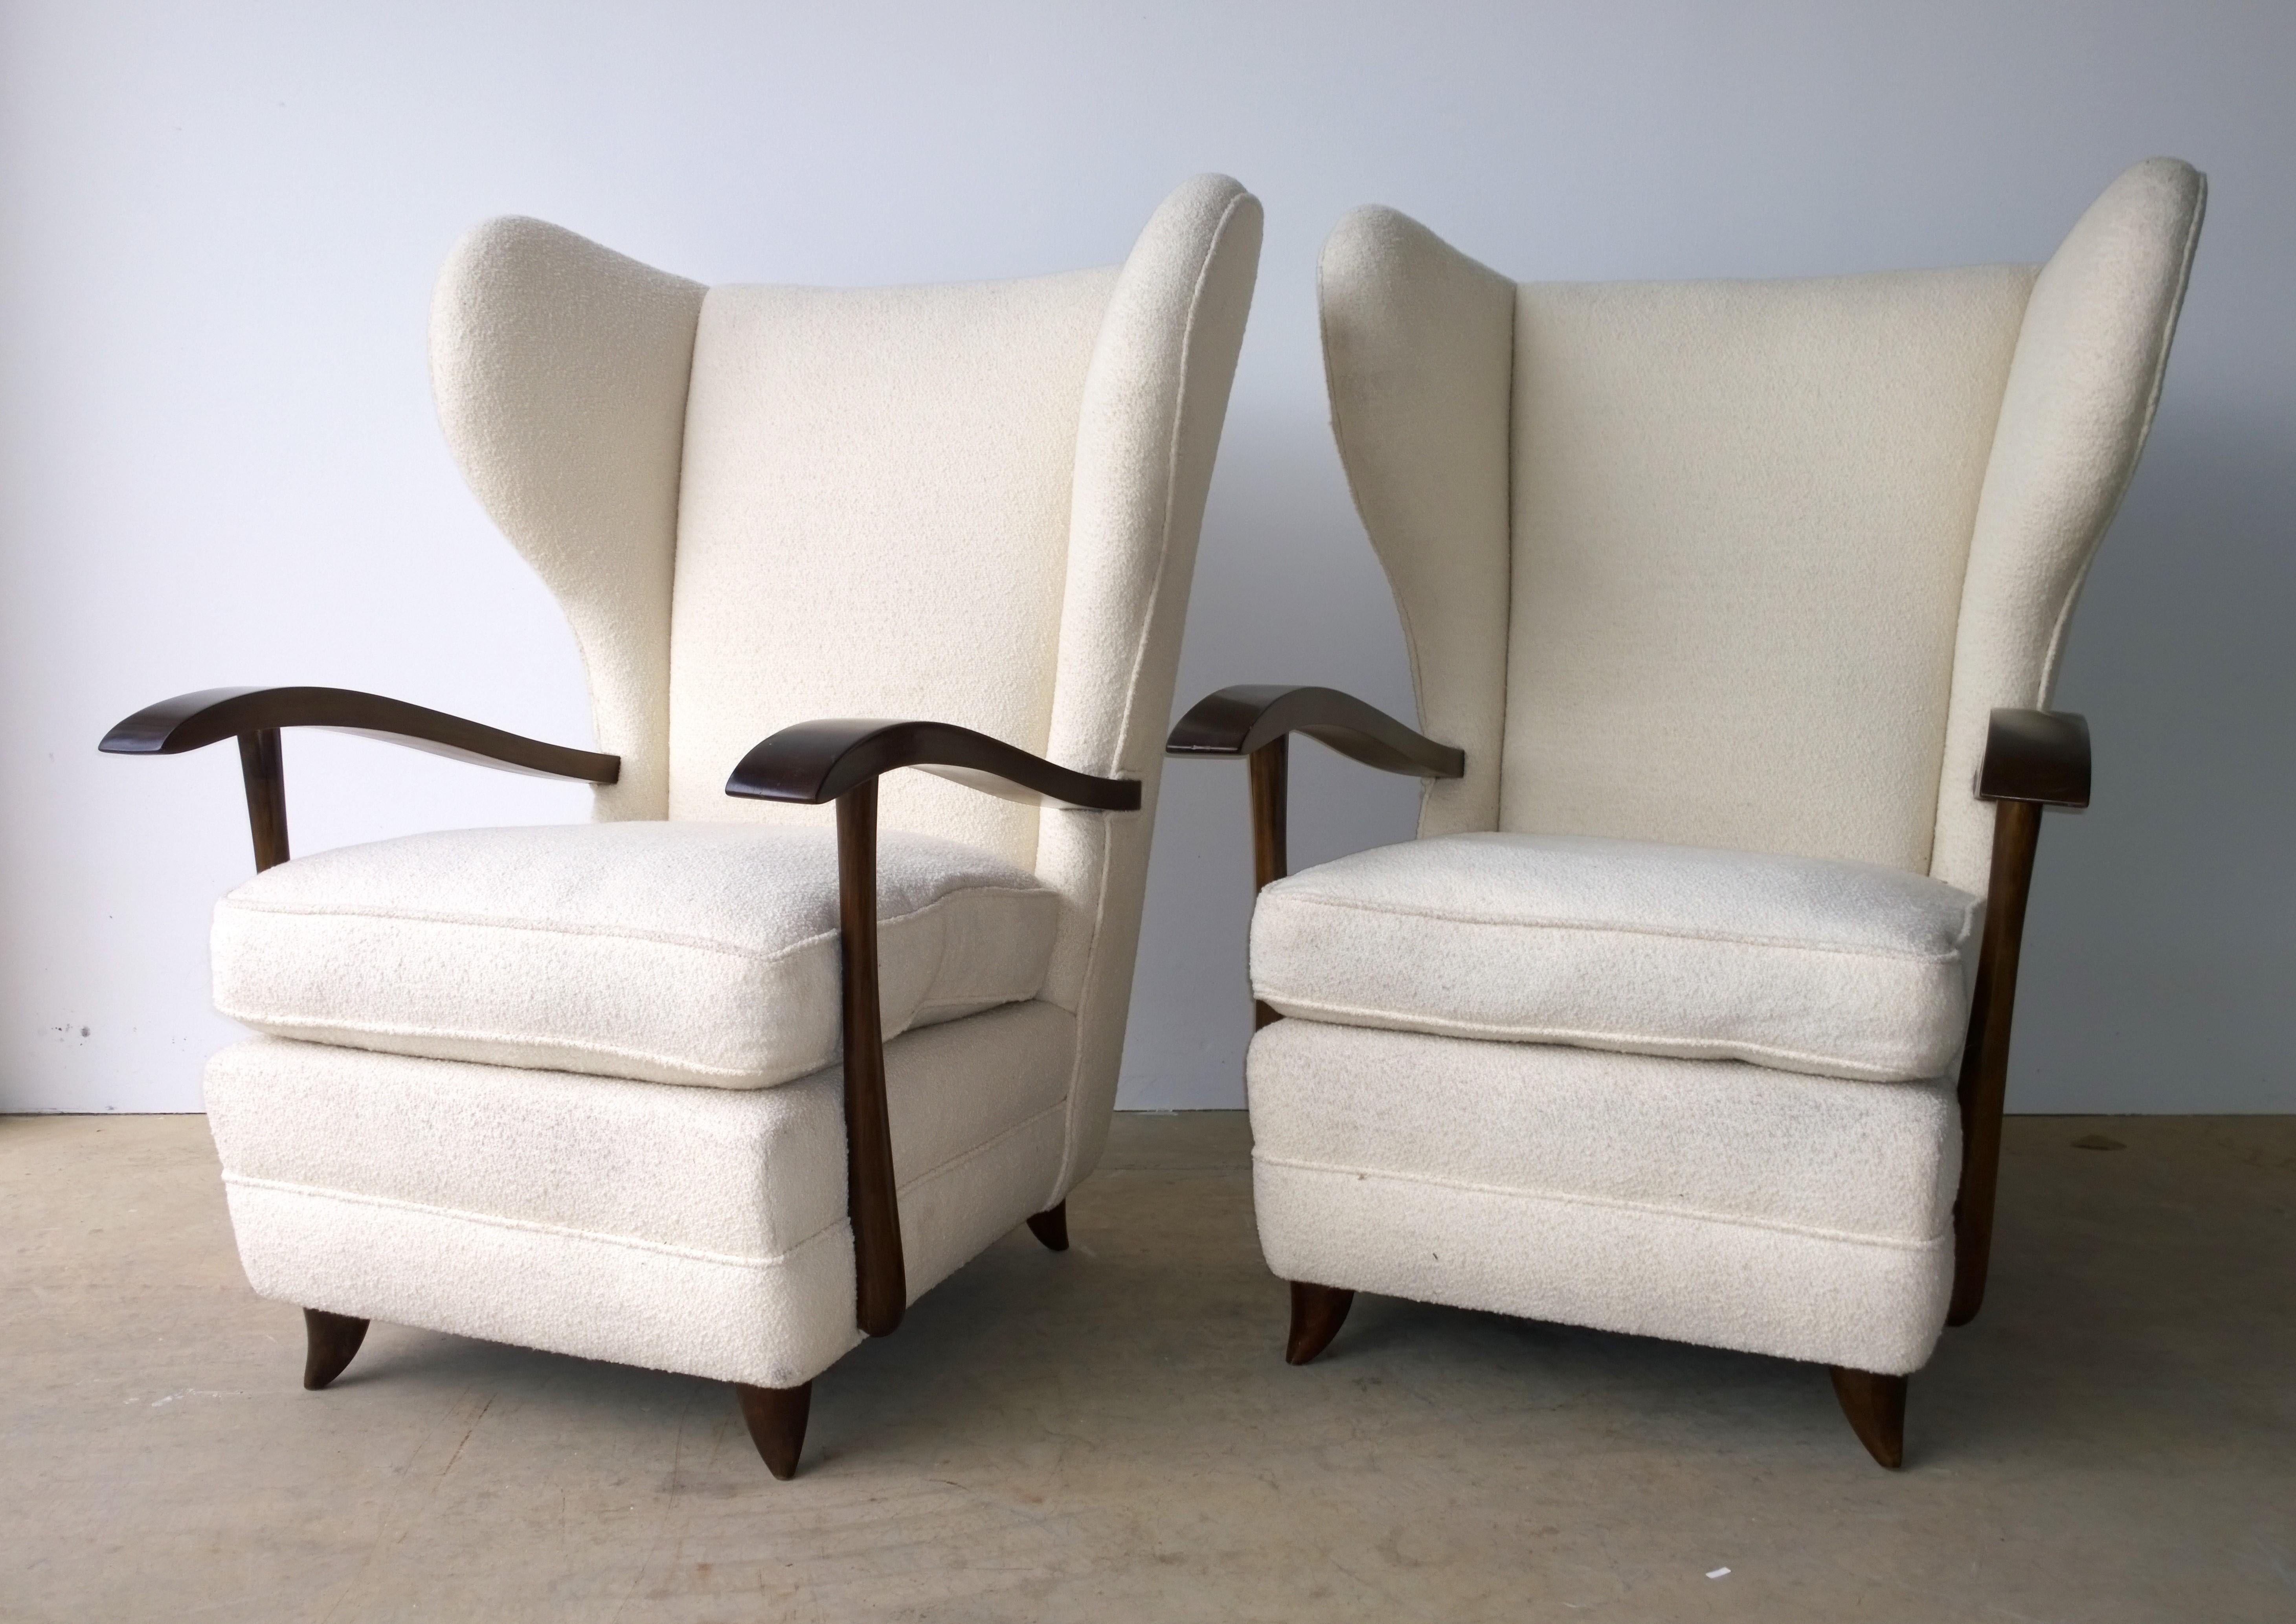 Offered is a pair of Mid-Century Modern Italian Paola Buffa attributed arm or lounge chairs with mahogany sculptural arms and upholstered in a white wool bouclé. The pair was purchased with the upholstery intact. Most likely the upholstery was